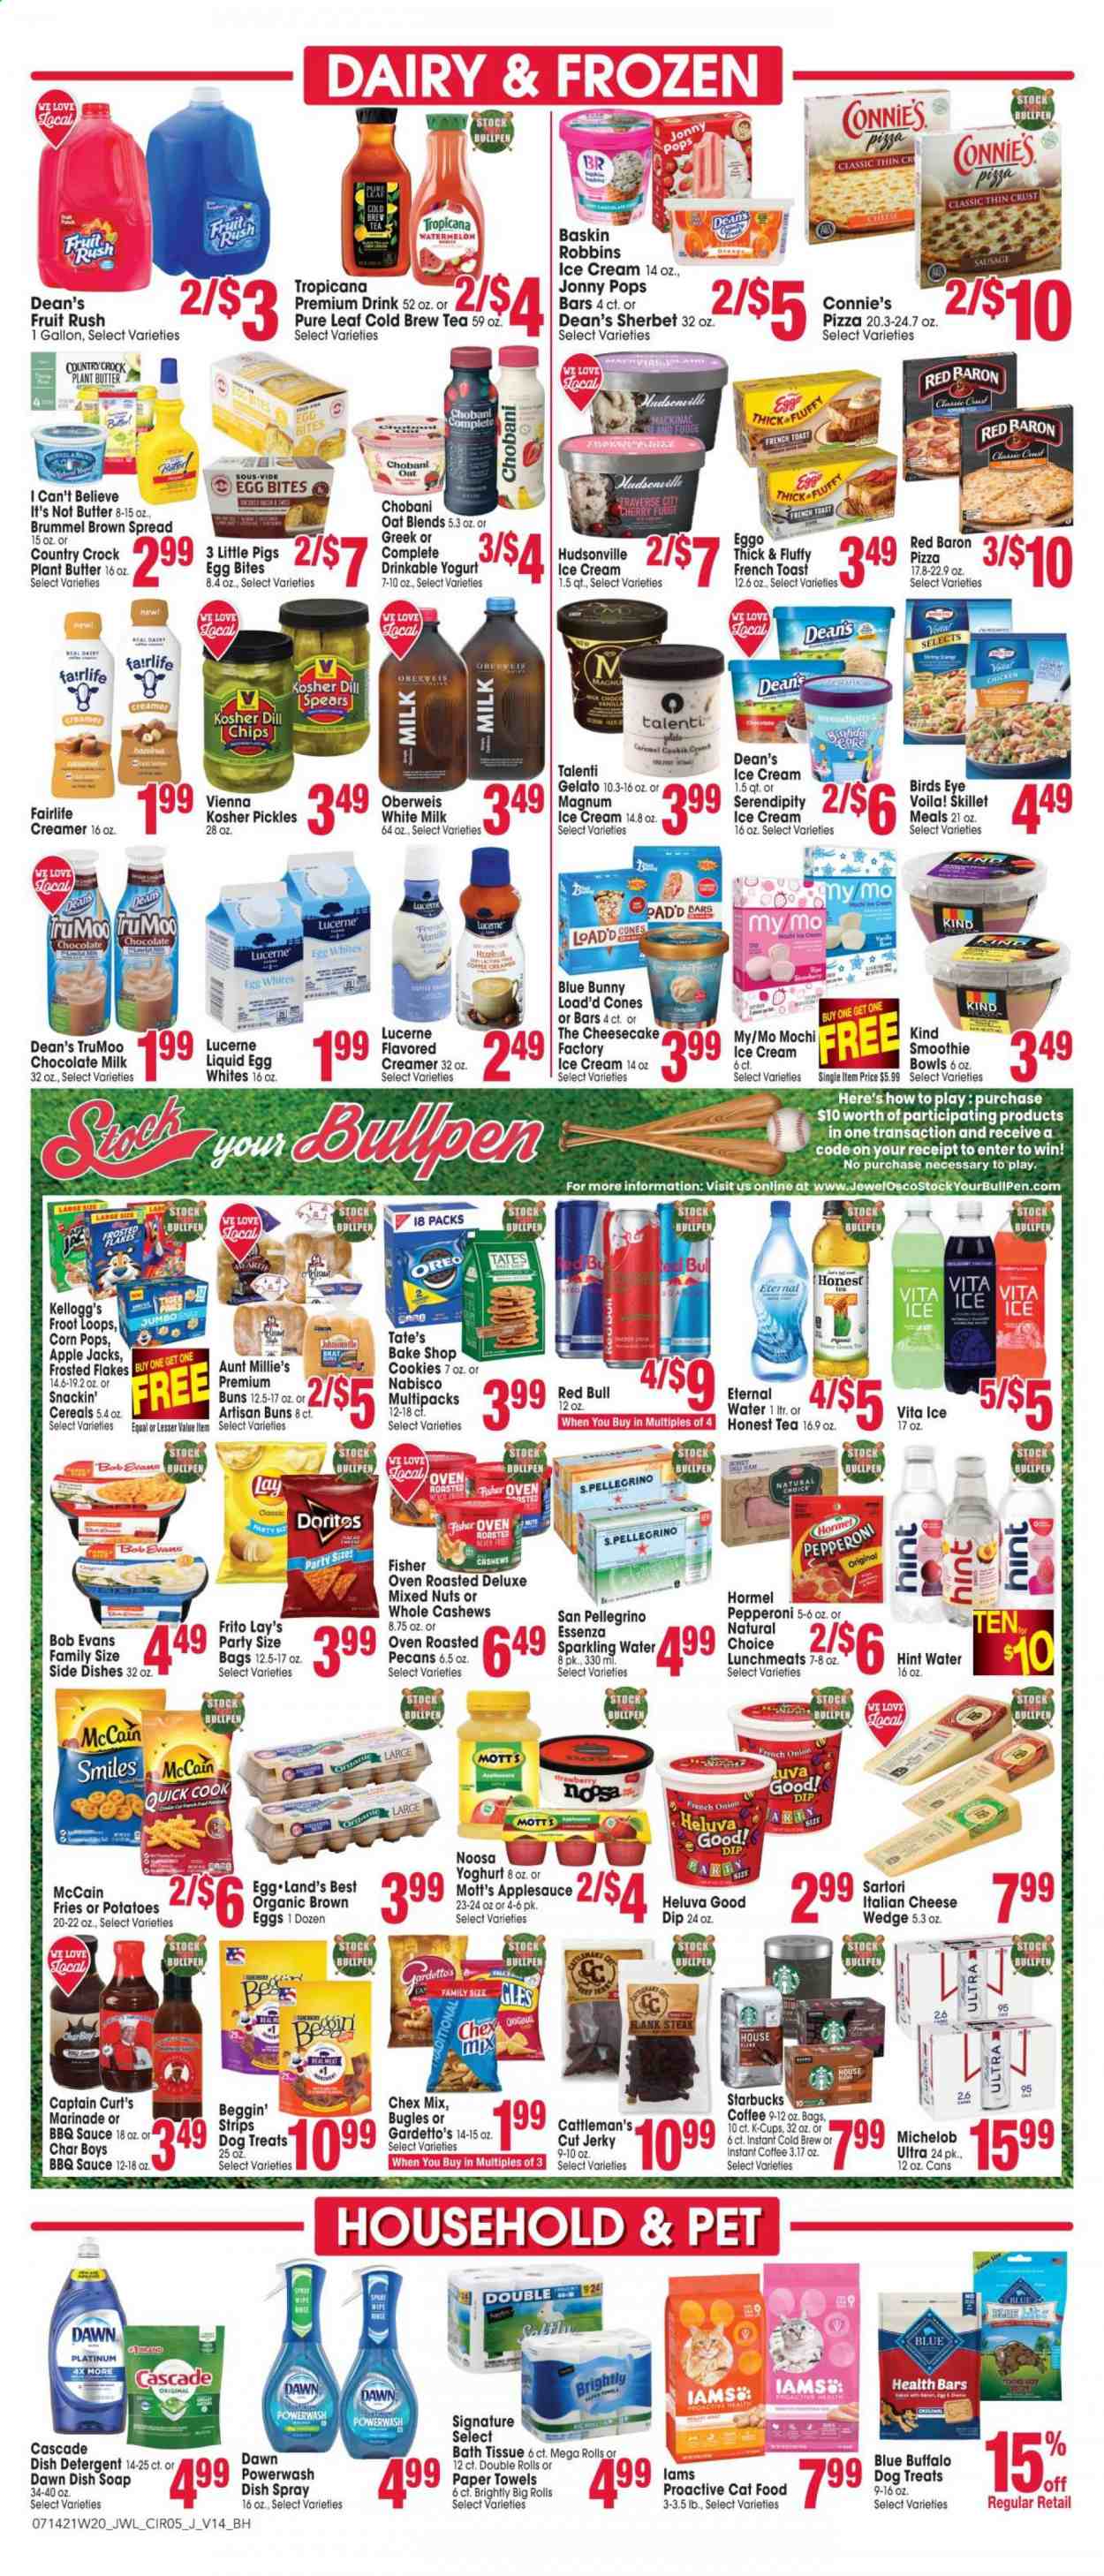 thumbnail - Jewel Osco Flyer - 07/14/2021 - 07/20/2021 - Sales products - Michelob, buns, potatoes, onion, watermelon, Mott's, pizza, sauce, Bird's Eye, Bob Evans, Hormel, ham, jerky, Johnsonville, sausage, pepperoni, lunch meat, Oreo, Chobani, eggs, butter, I Can't Believe It's Not Butter, creamer, dip, Magnum, ice cream, sherbet, Talenti Gelato, gelato, Blue Bunny, strips, McCain, potato fries, Red Baron, cookies, fudge, milk chocolate, Kellogg's, Lay’s, Chex Mix, oats, pickles, cereals, Frosted Flakes, Corn Pops, dill, BBQ sauce, marinade, apple sauce, honey, cashews, pecans, mixed nuts, Red Bull, sparkling water, San Pellegrino, tea, Pure Leaf, Starbucks, instant coffee, coffee capsules, K-Cups, punch, beer, steak, bath tissue, kitchen towels, paper towels, detergent, Cascade, soap, animal food, Blue Buffalo, cat food, Beggin', Iams. Page 5.